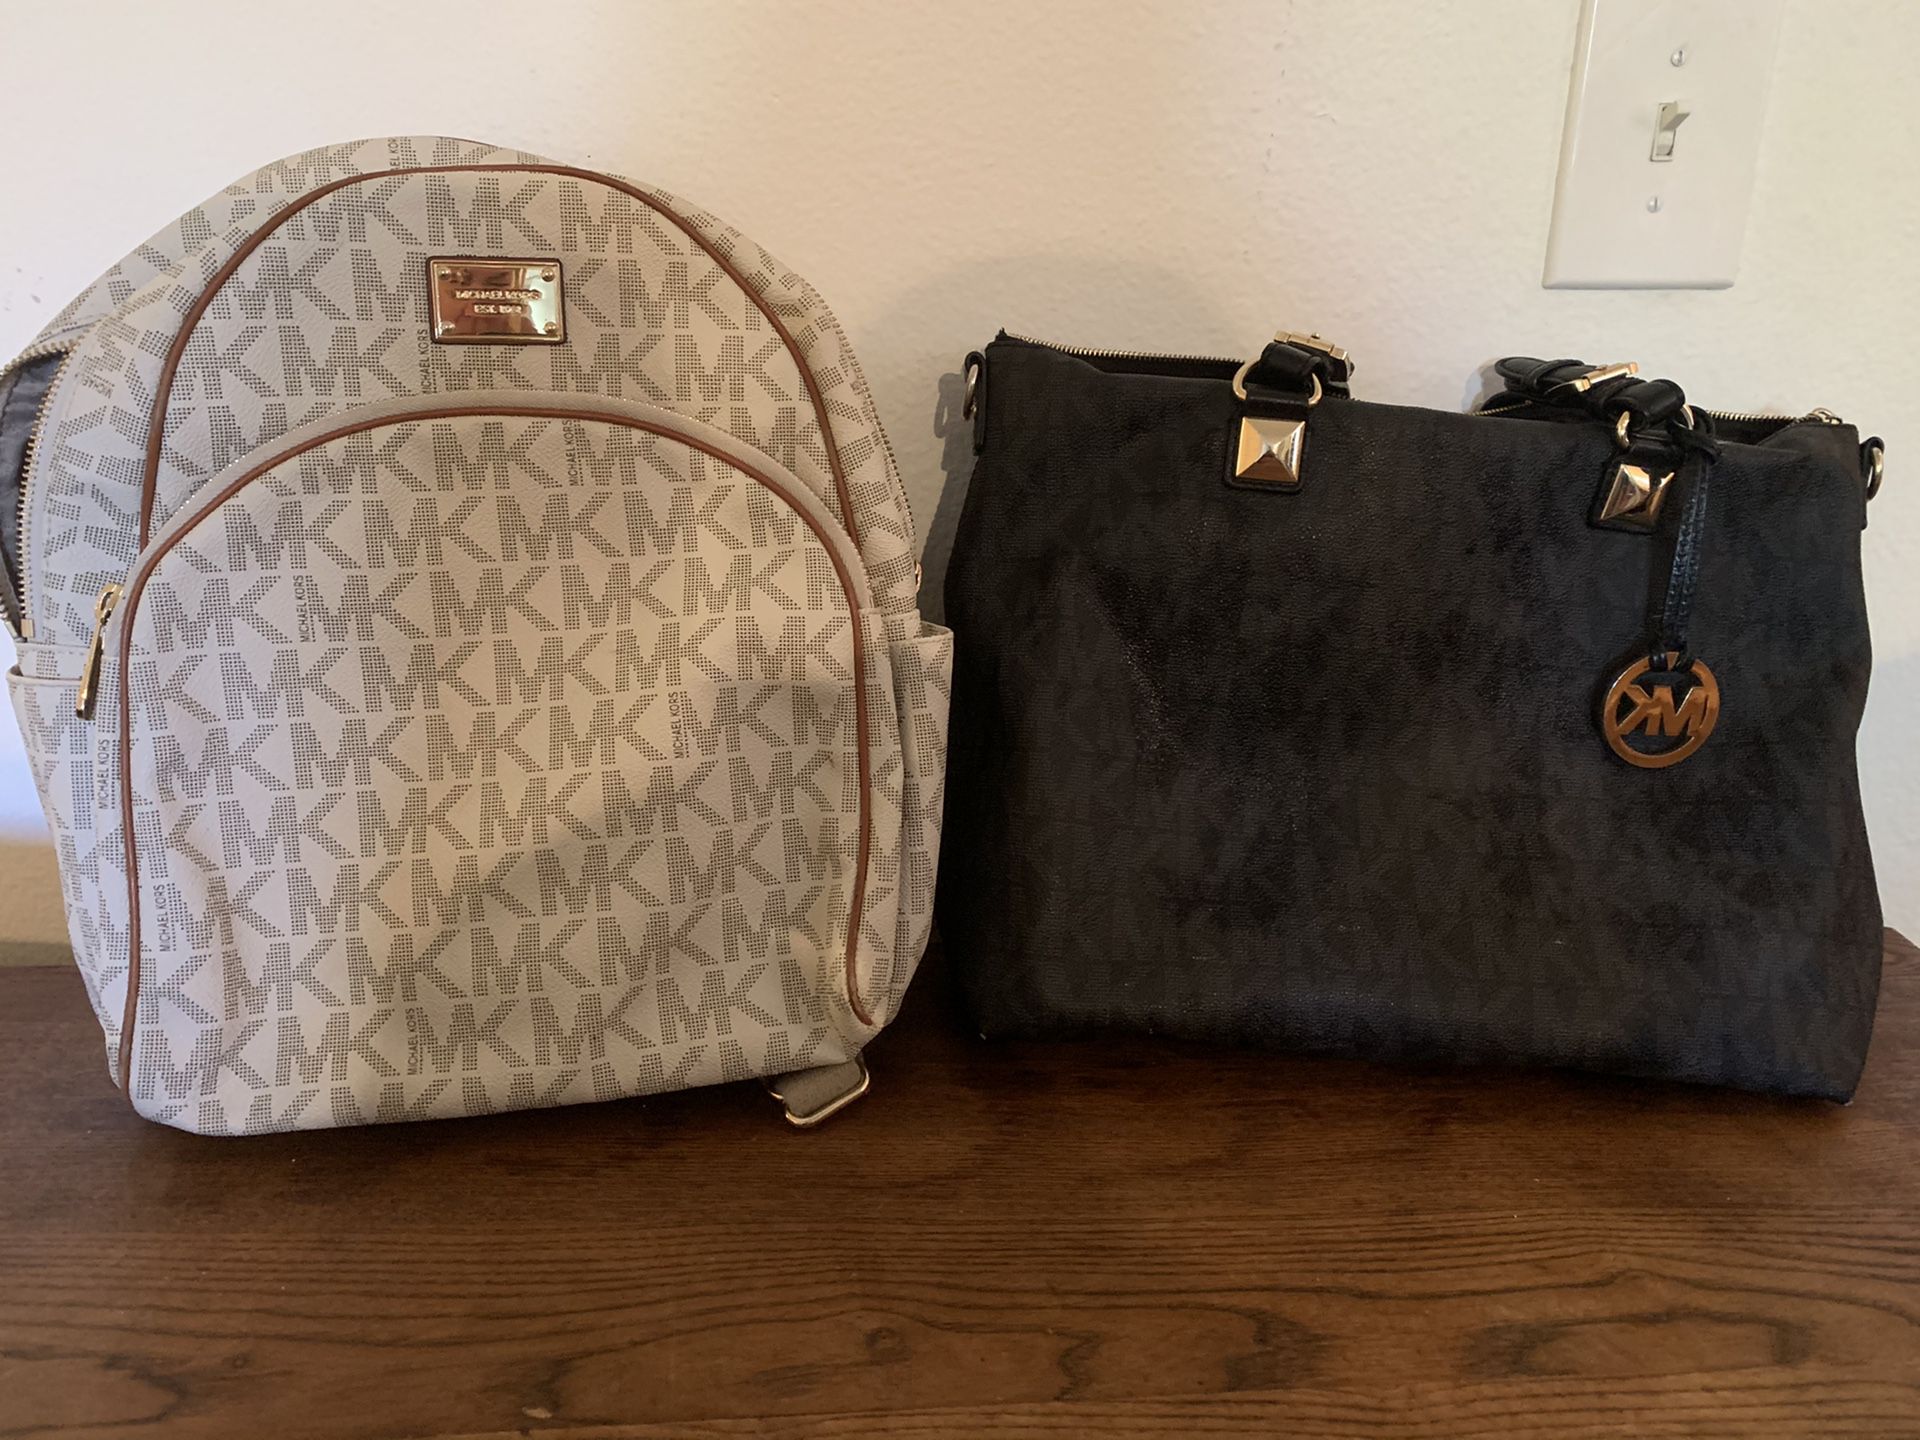 Micheal Kors Purse and backpack